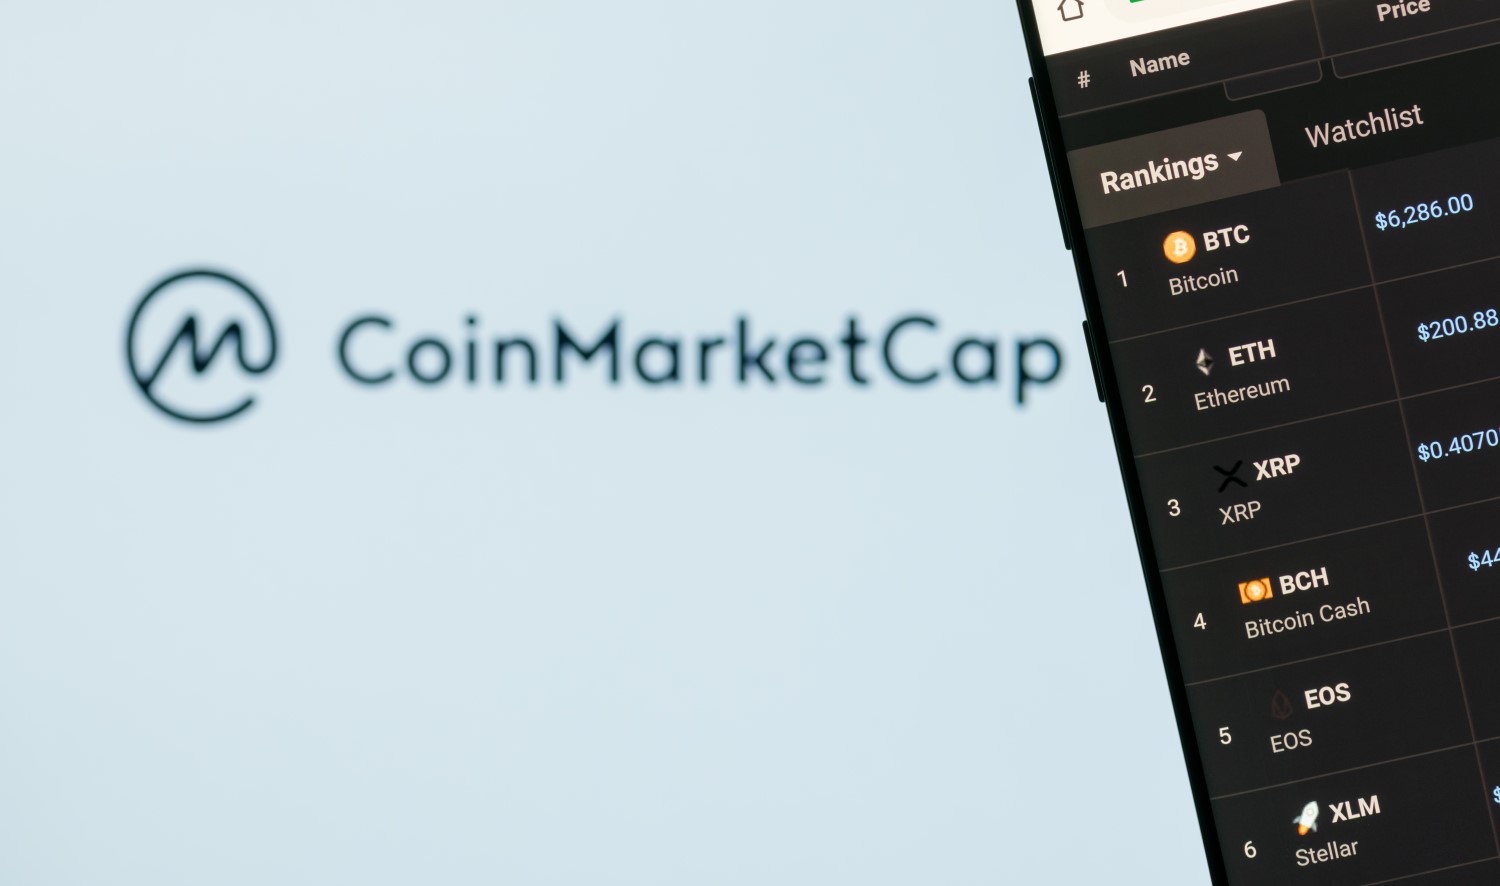 CoinMarketCap Makes First Acquisition To Further Improve Crypto Data Offering